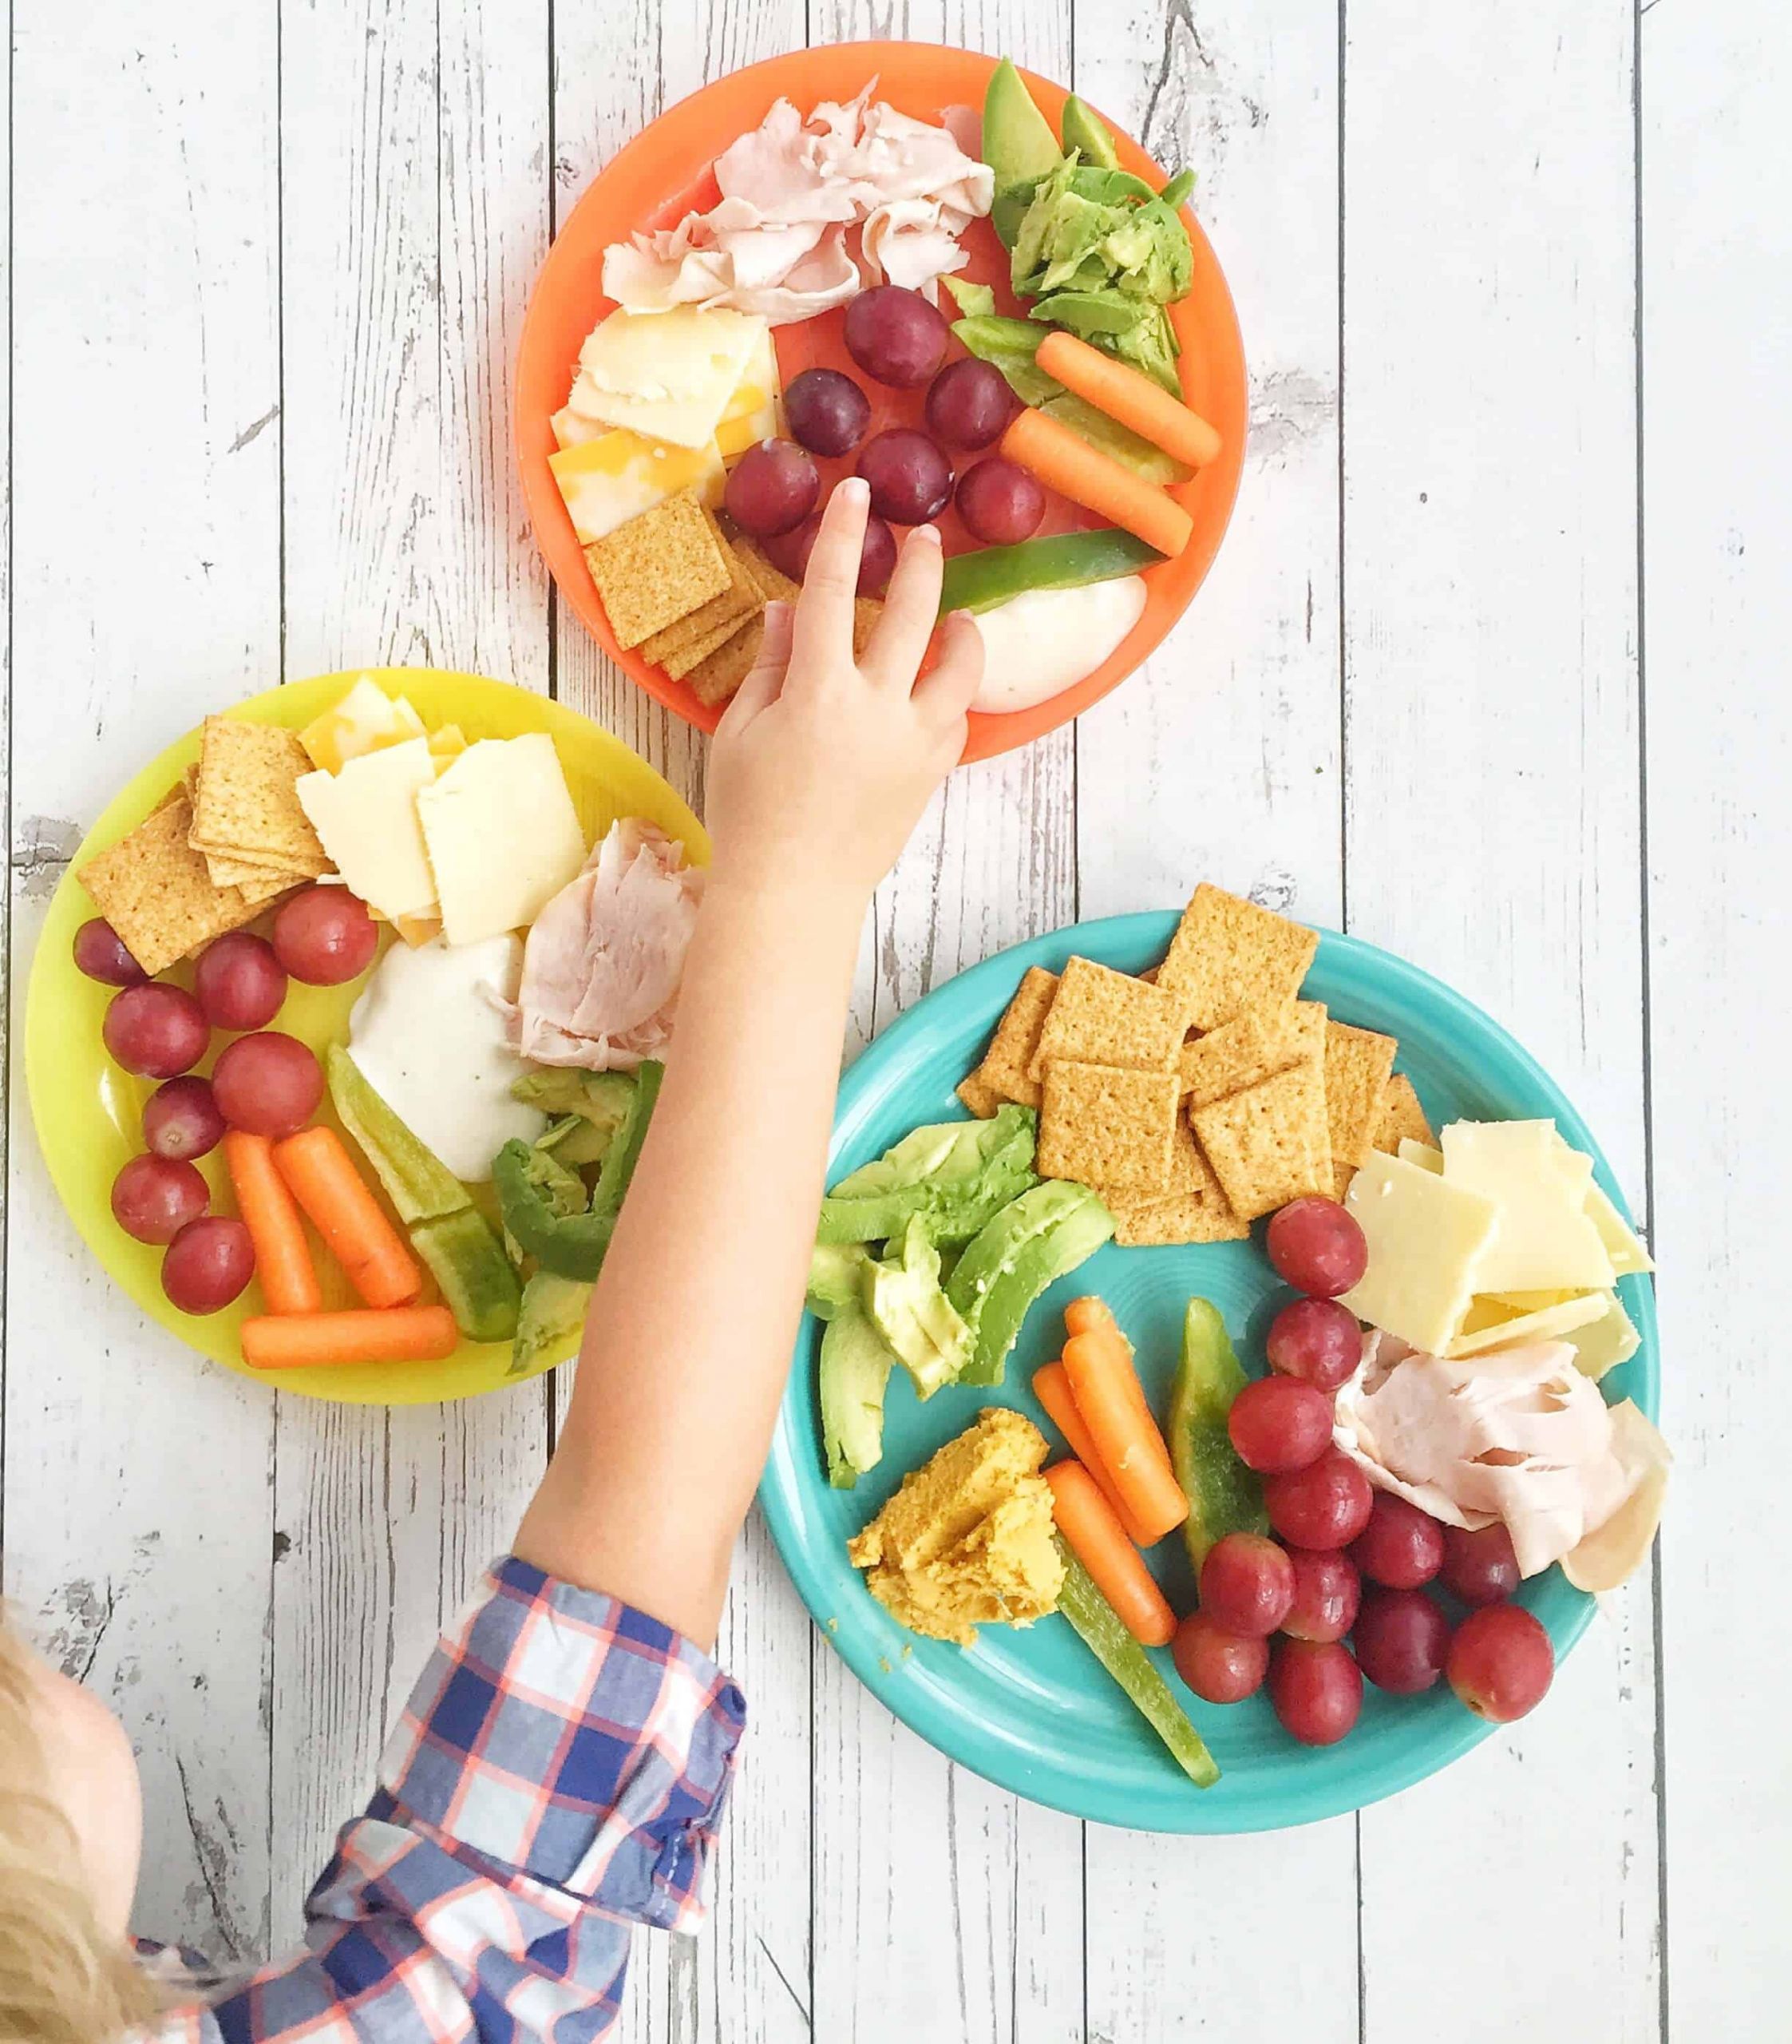 Healthy Dinner Ideas for Kids Awesome Healthy Meals for Kids Make Healthy Easy Jenna Braddock Rd